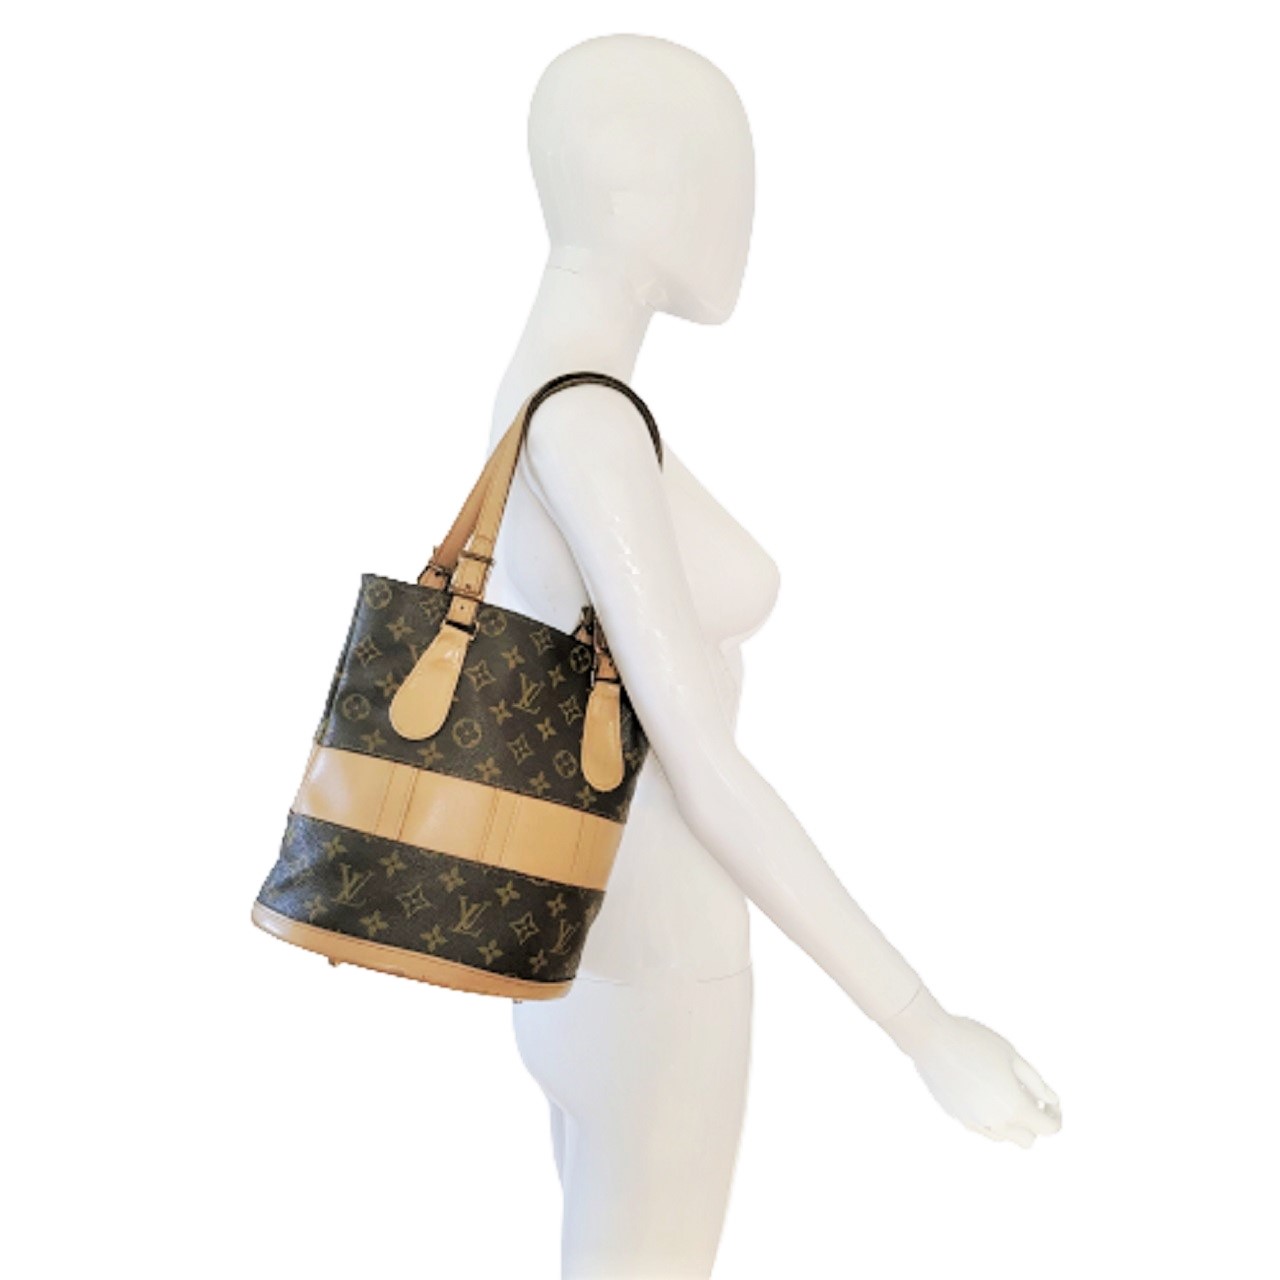 Louis Vuitton French Co Vintage Monogram Bucket Bag Made in USA